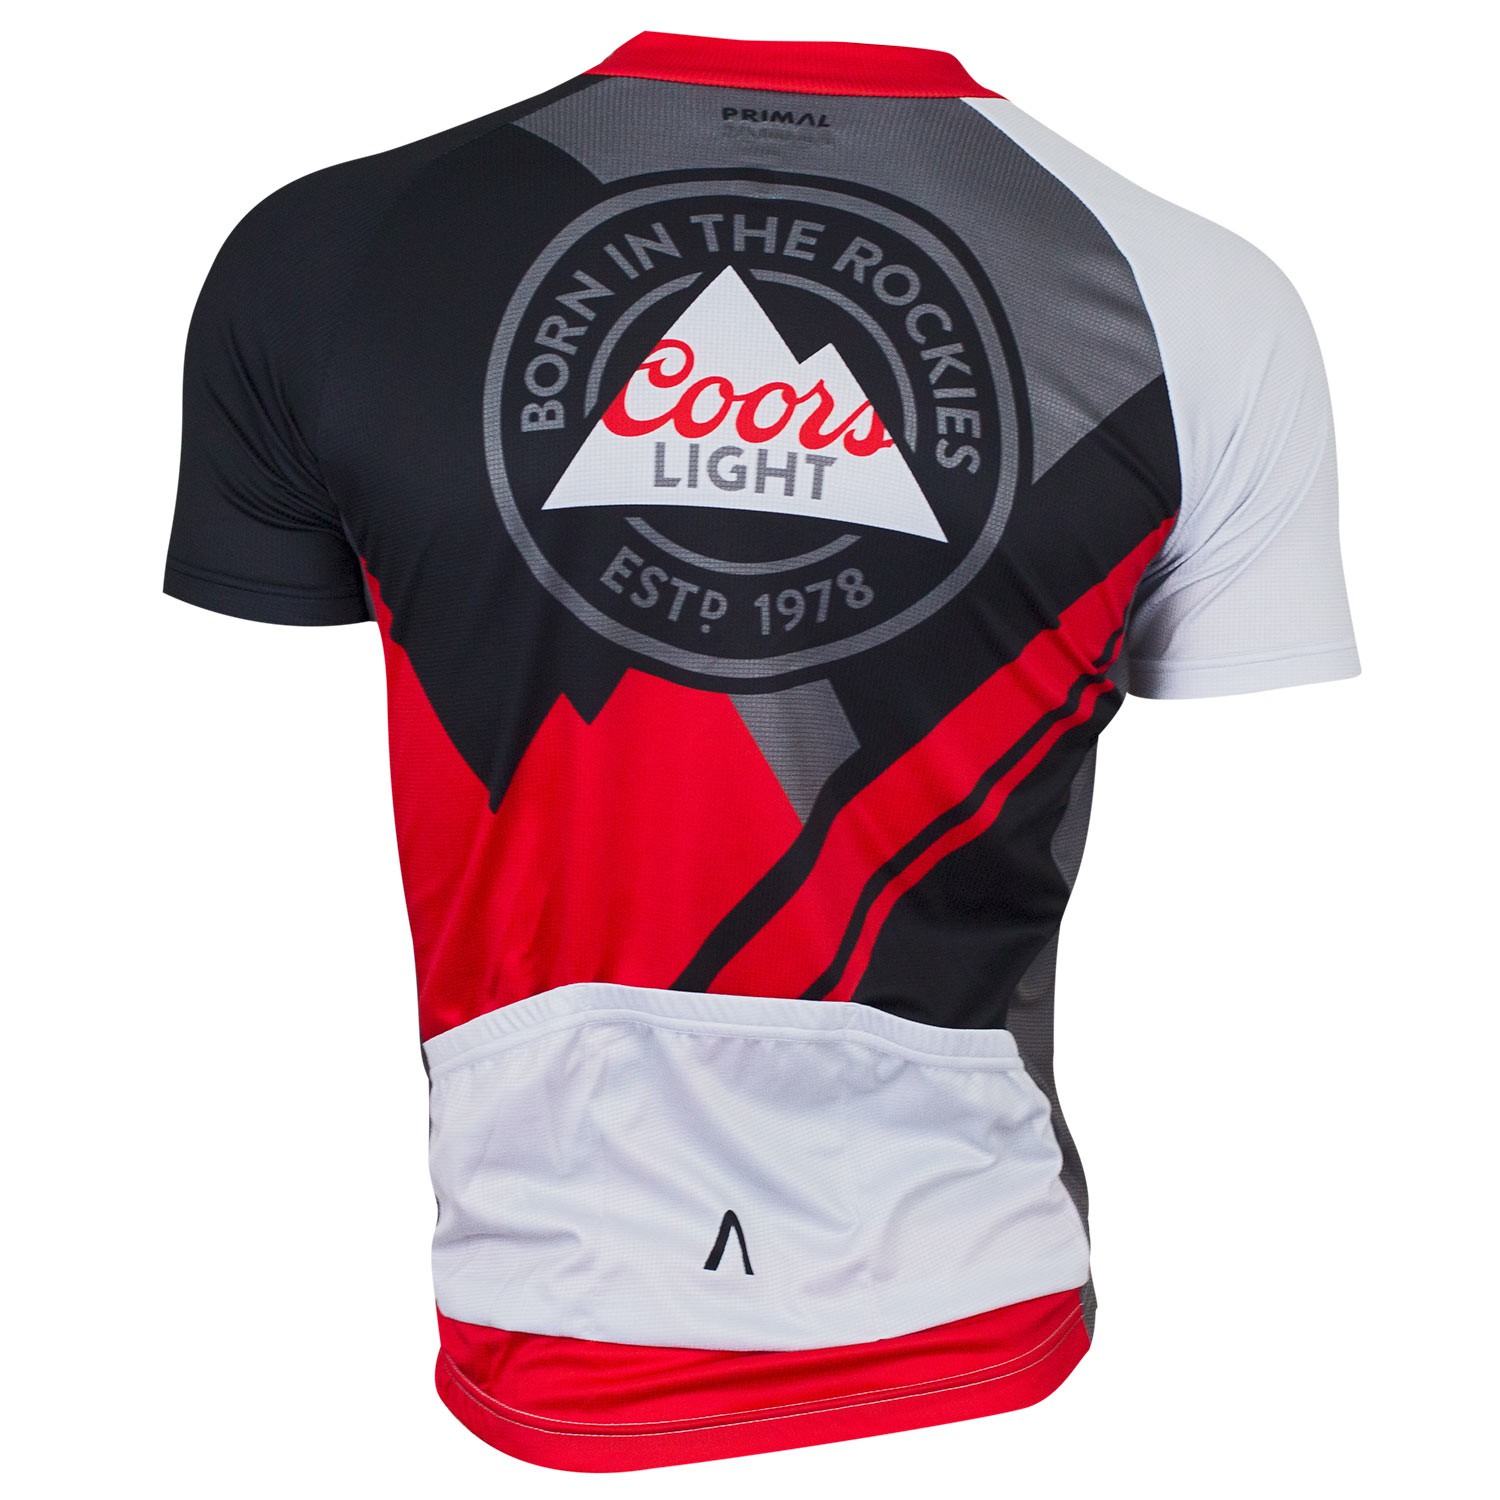 Coors Light Cycling Jersey